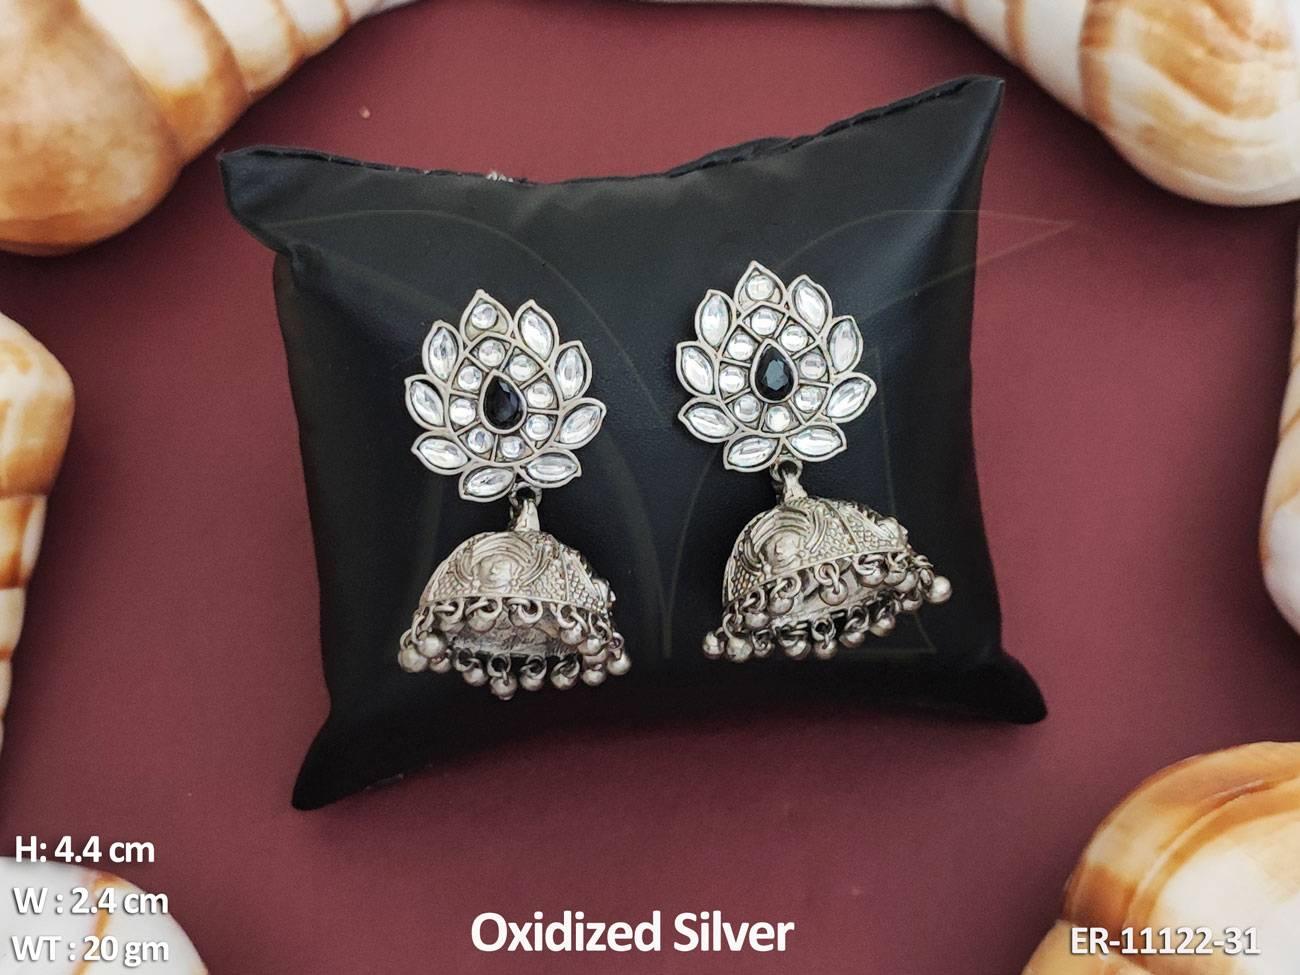 Perfect for any special occasion, these earrings are a must-have for any fashion-conscious individual.